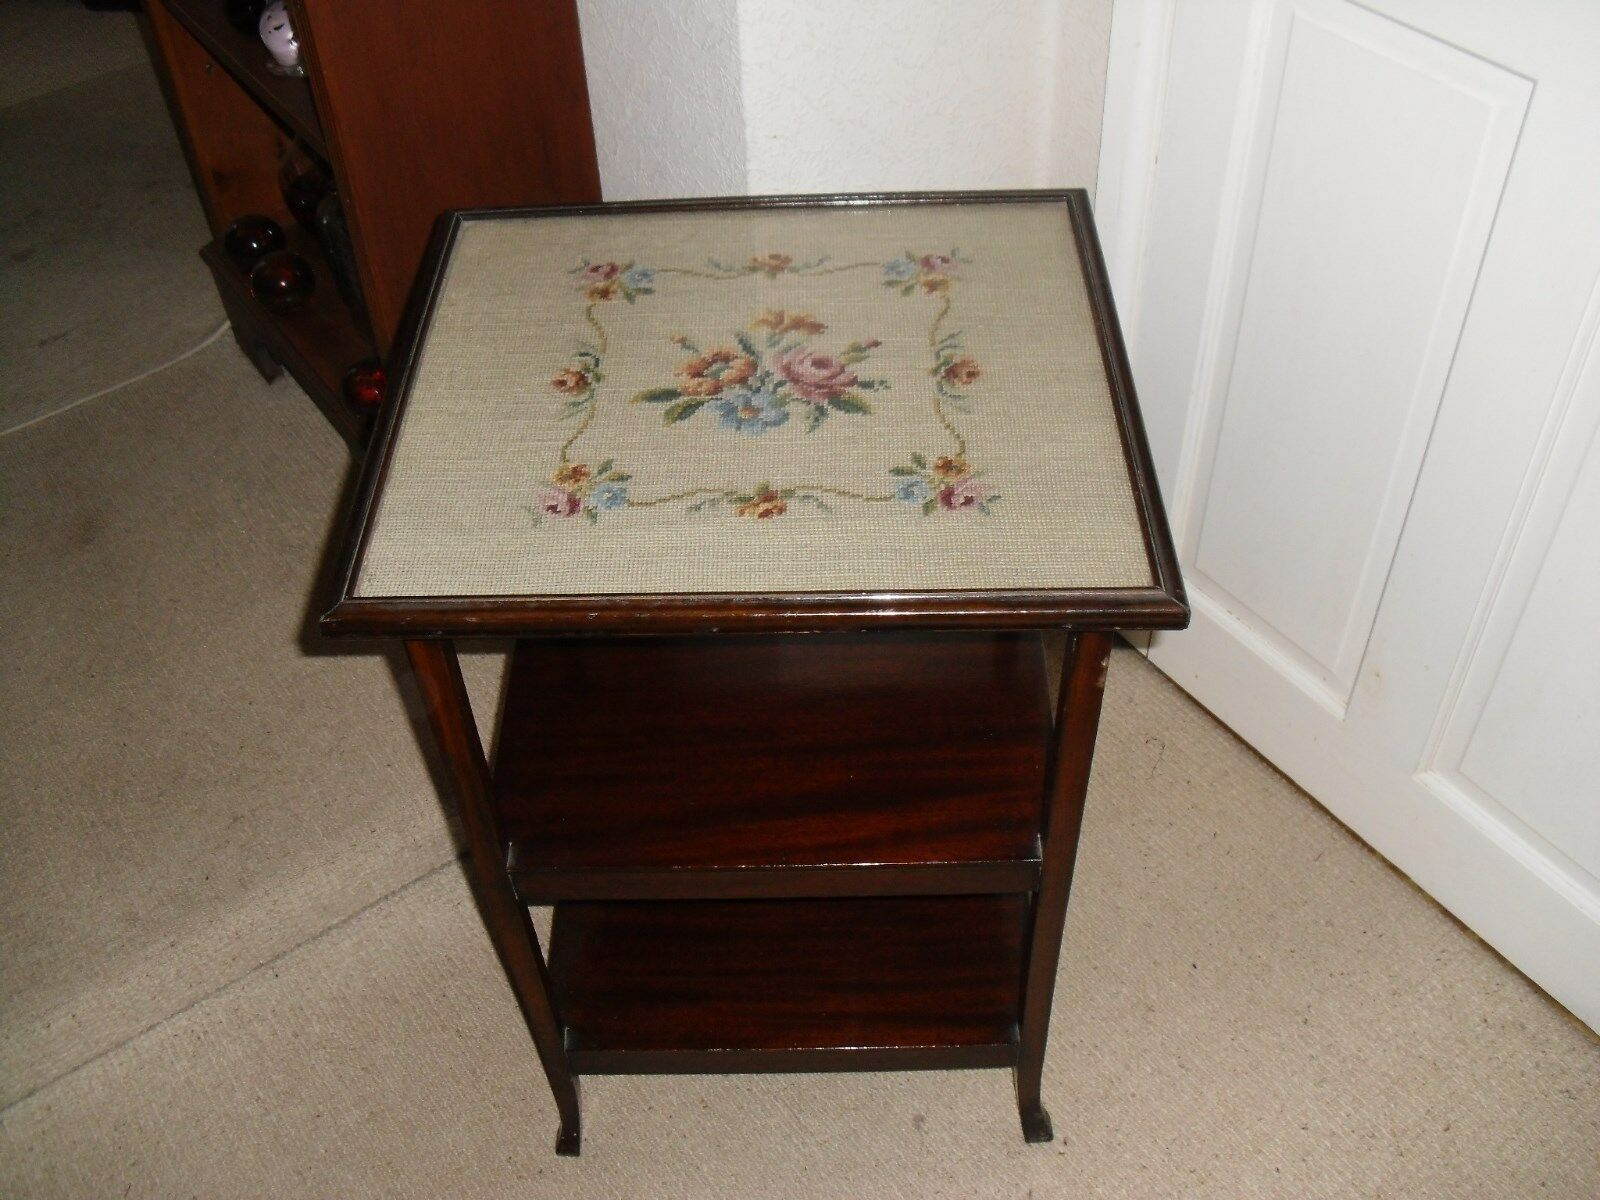 Antique / Vintage Tall Side Table, Glass Protected Tapestry Top, Two Shelves